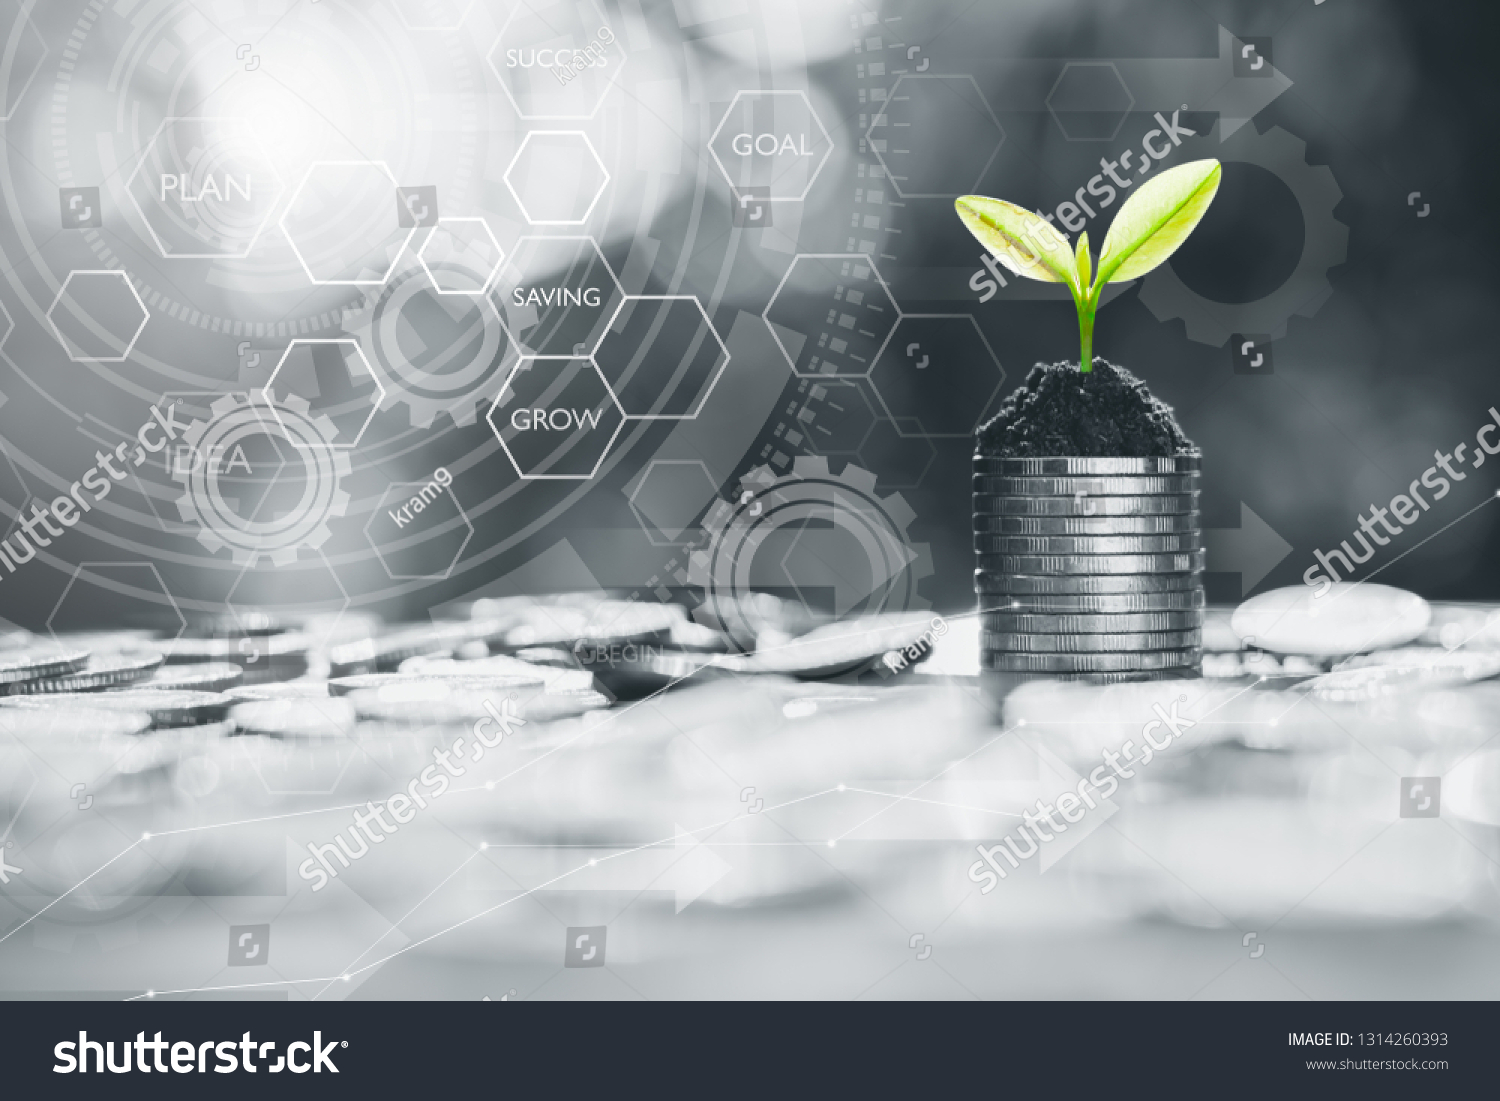 The coins are stacked together and the seedlings are growing on top of the icon technology about the financial growth around. #1314260393